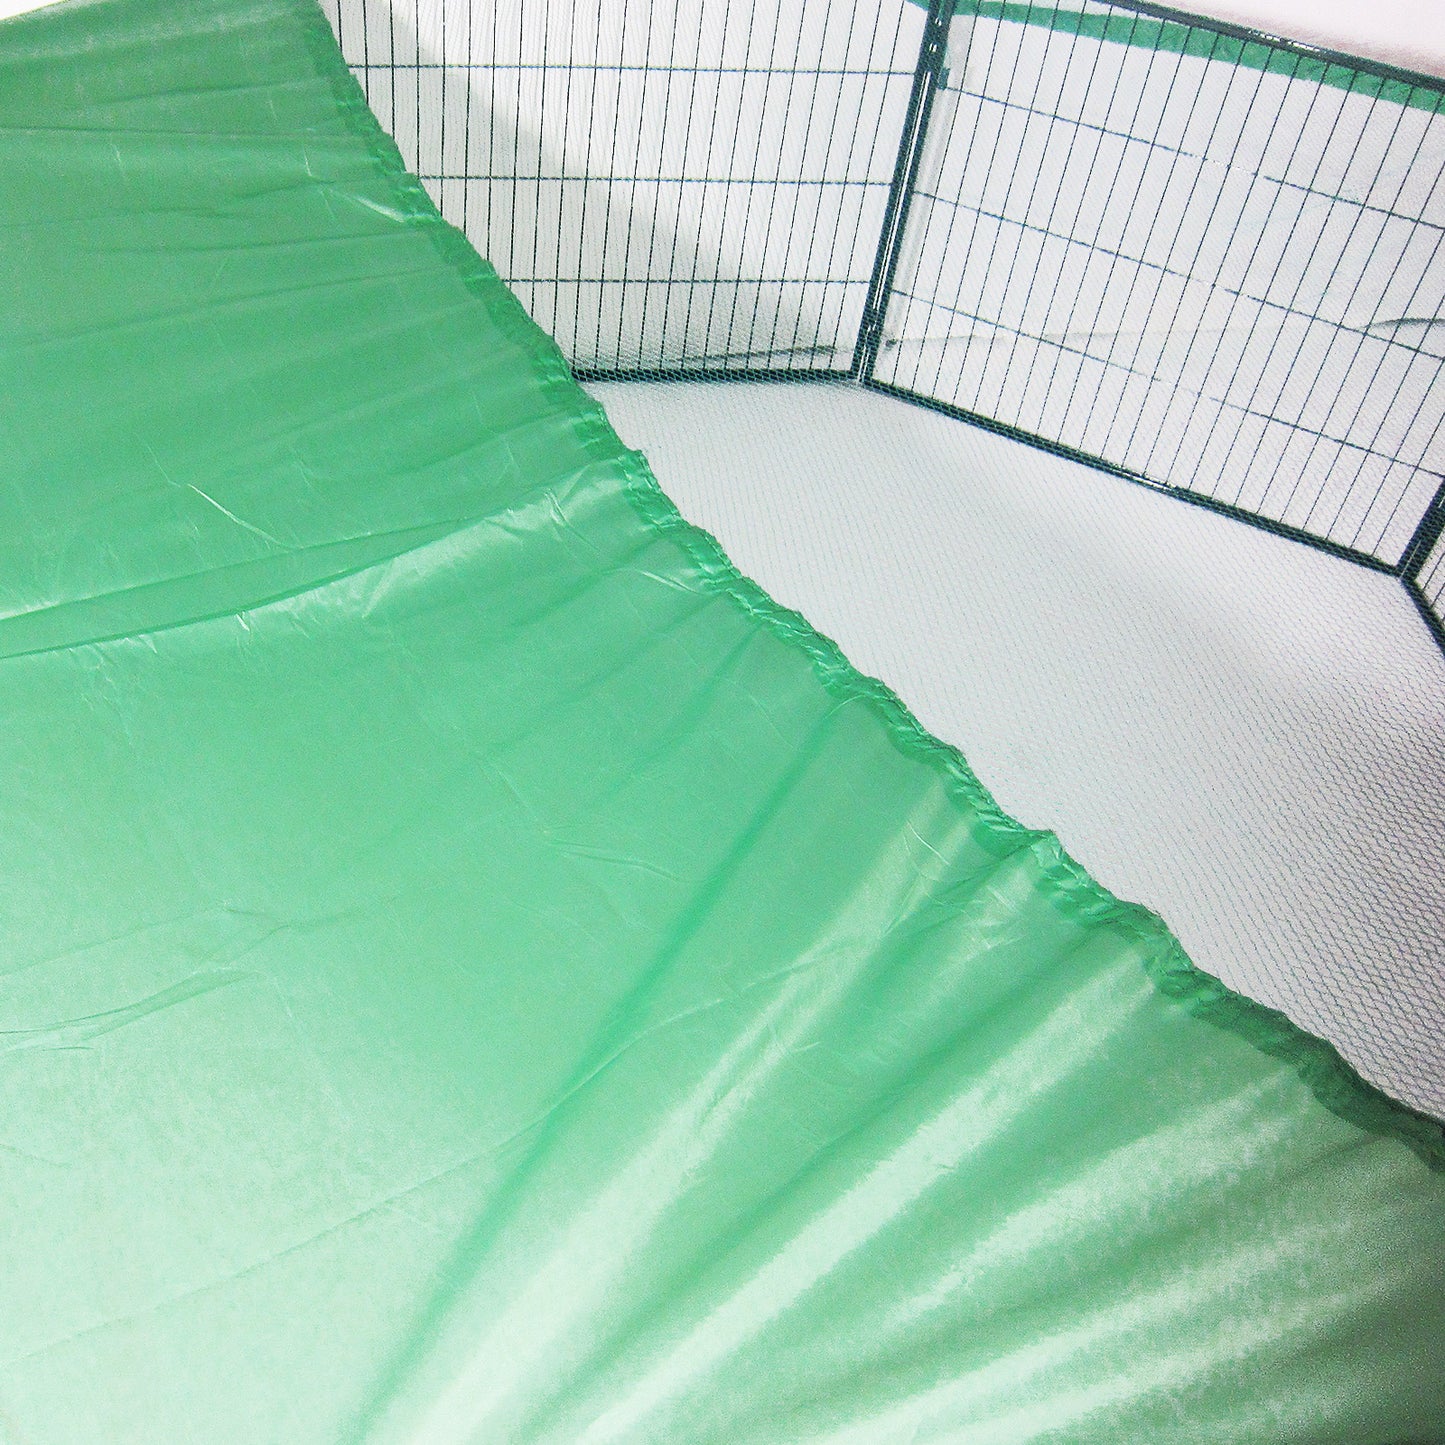 Net Cover Green for Pet Playpen Dog Cage 32in